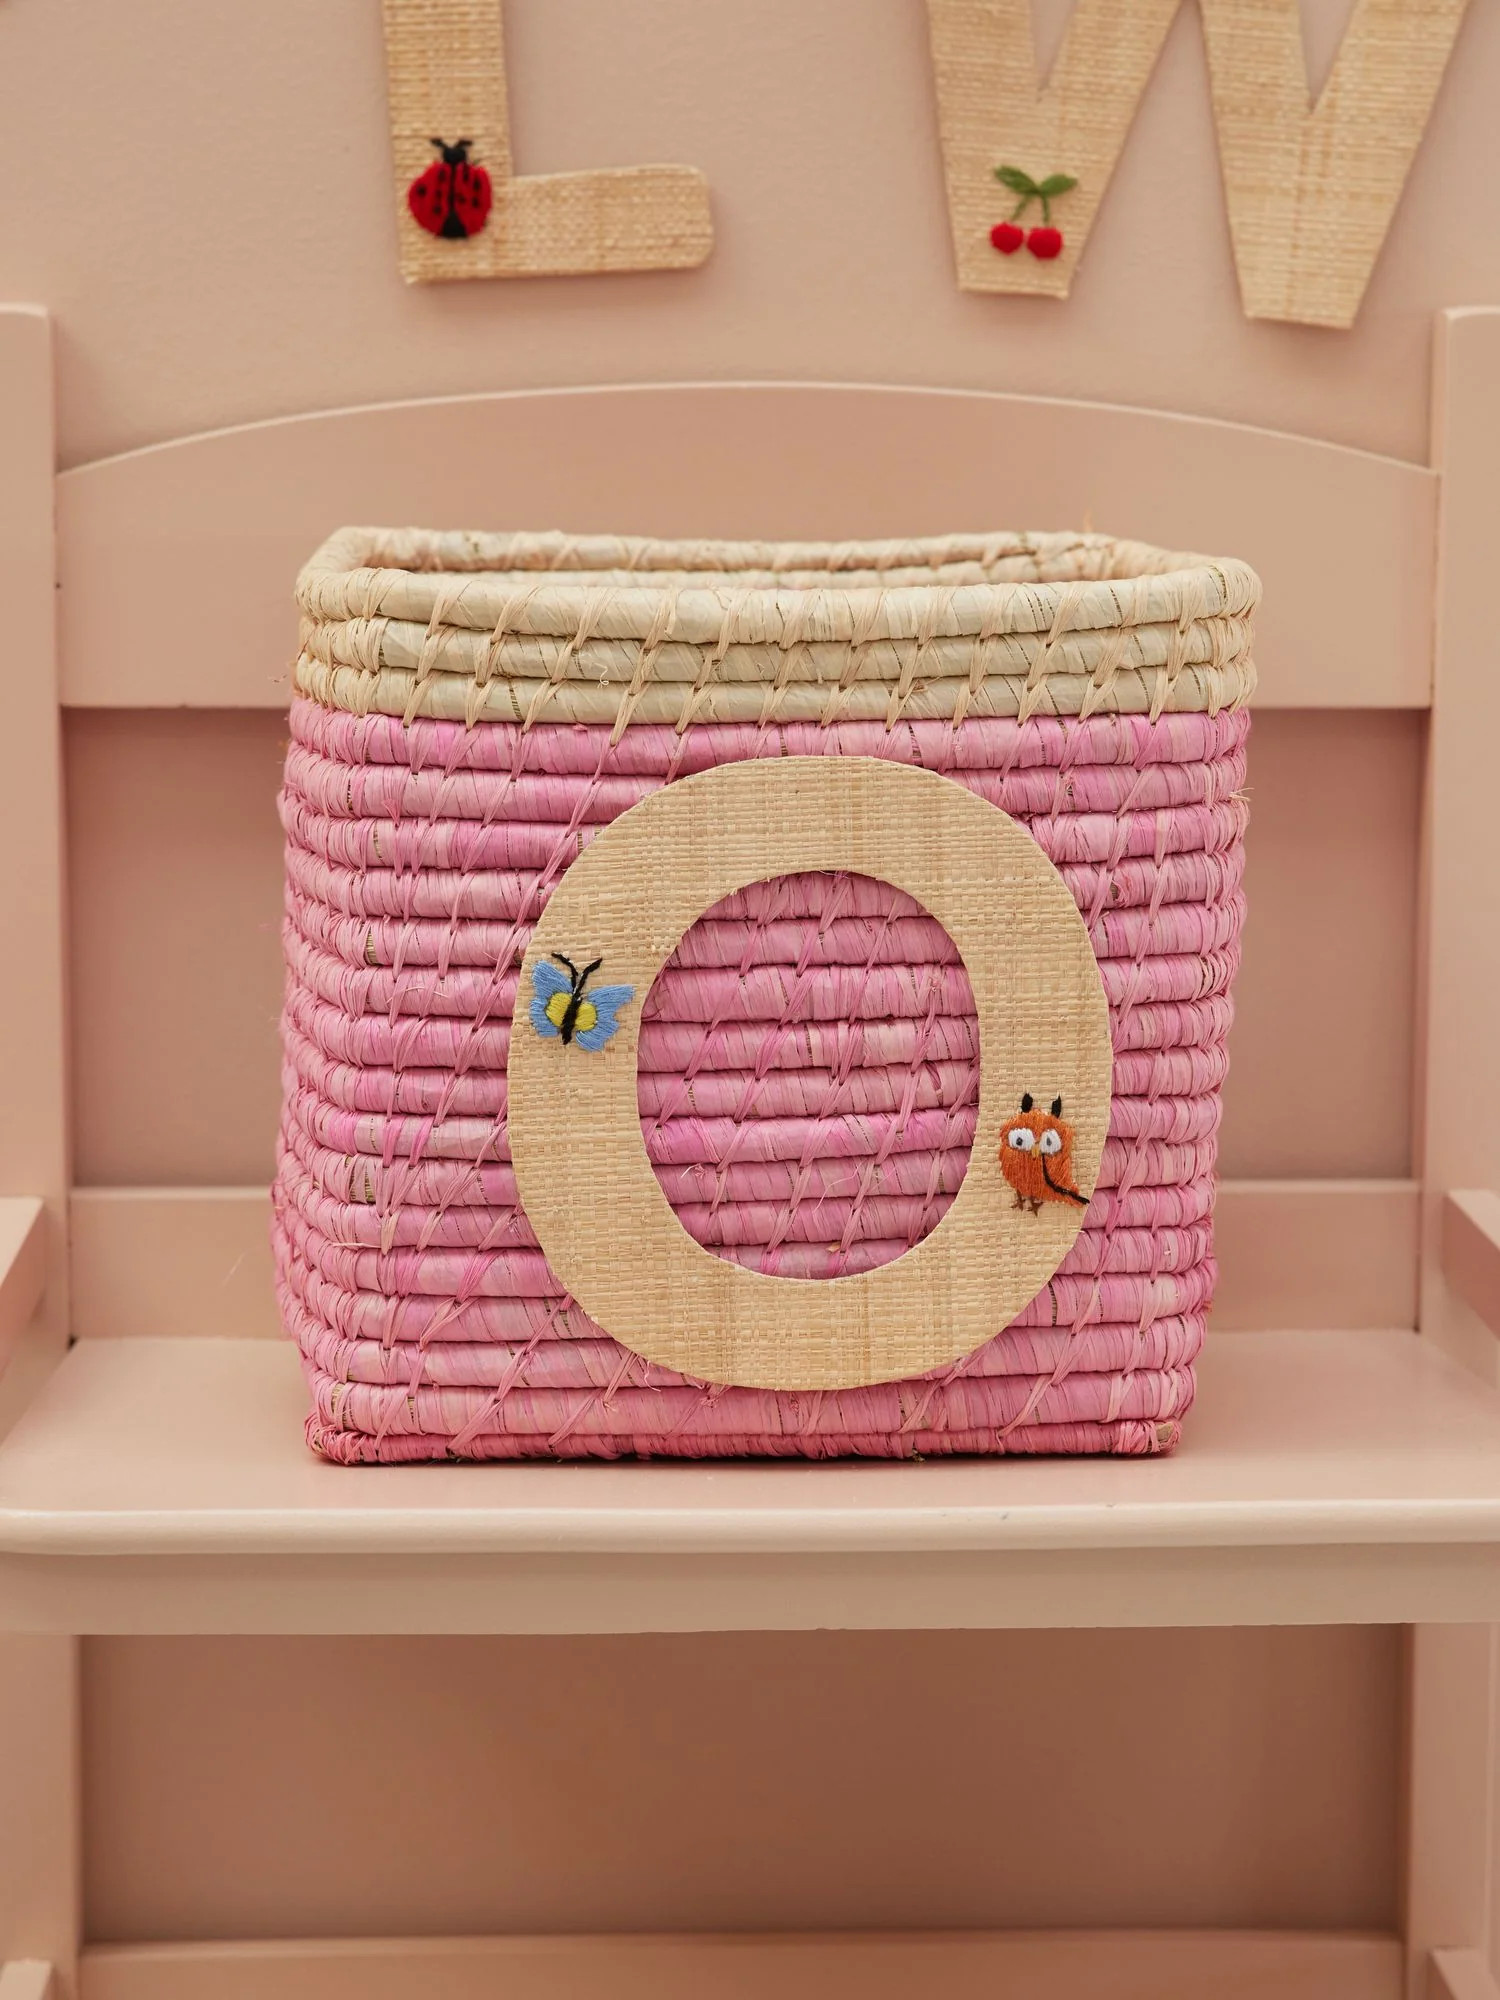 Raffia Basket in Soft Pink in Nature Border with One Raffia Letter - O | Rice By Rice